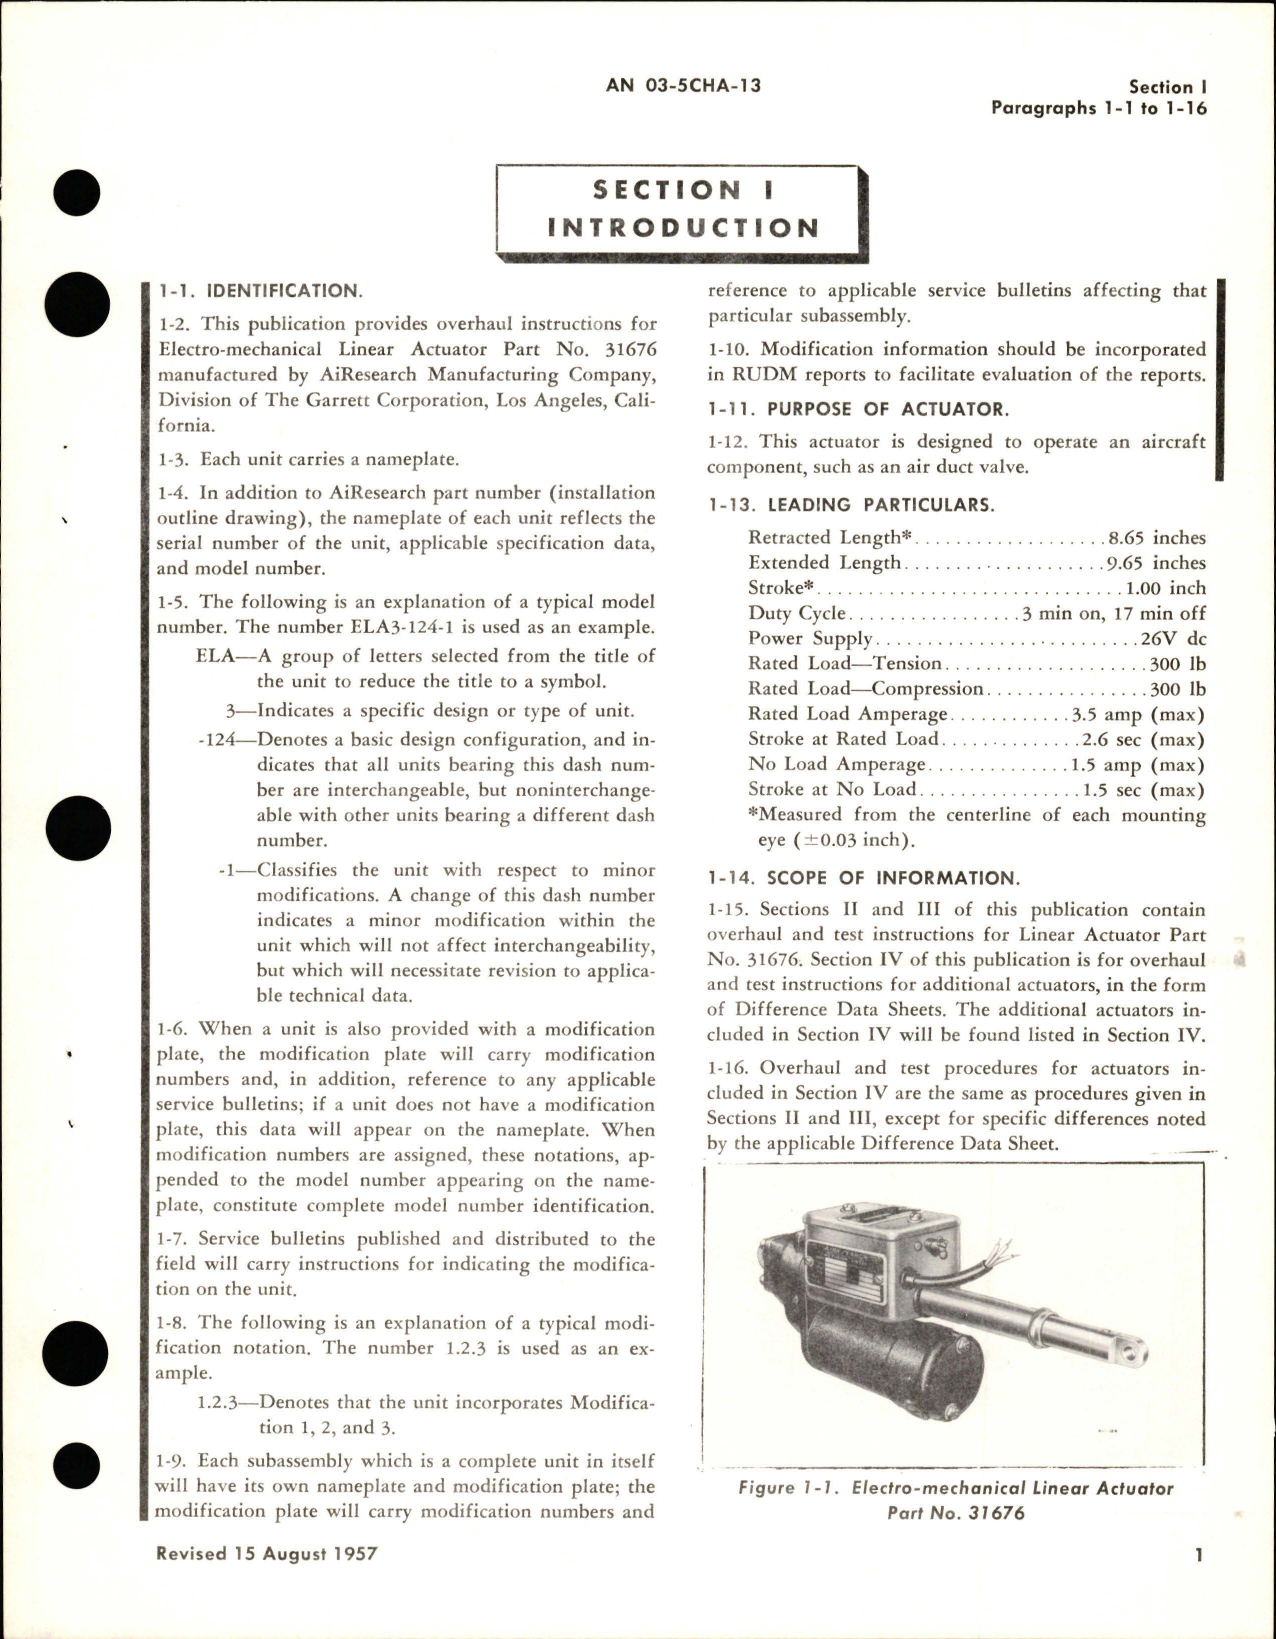 Sample page 5 from AirCorps Library document: Overhaul Instructions for Electro-Mechanical Linear Actuators 